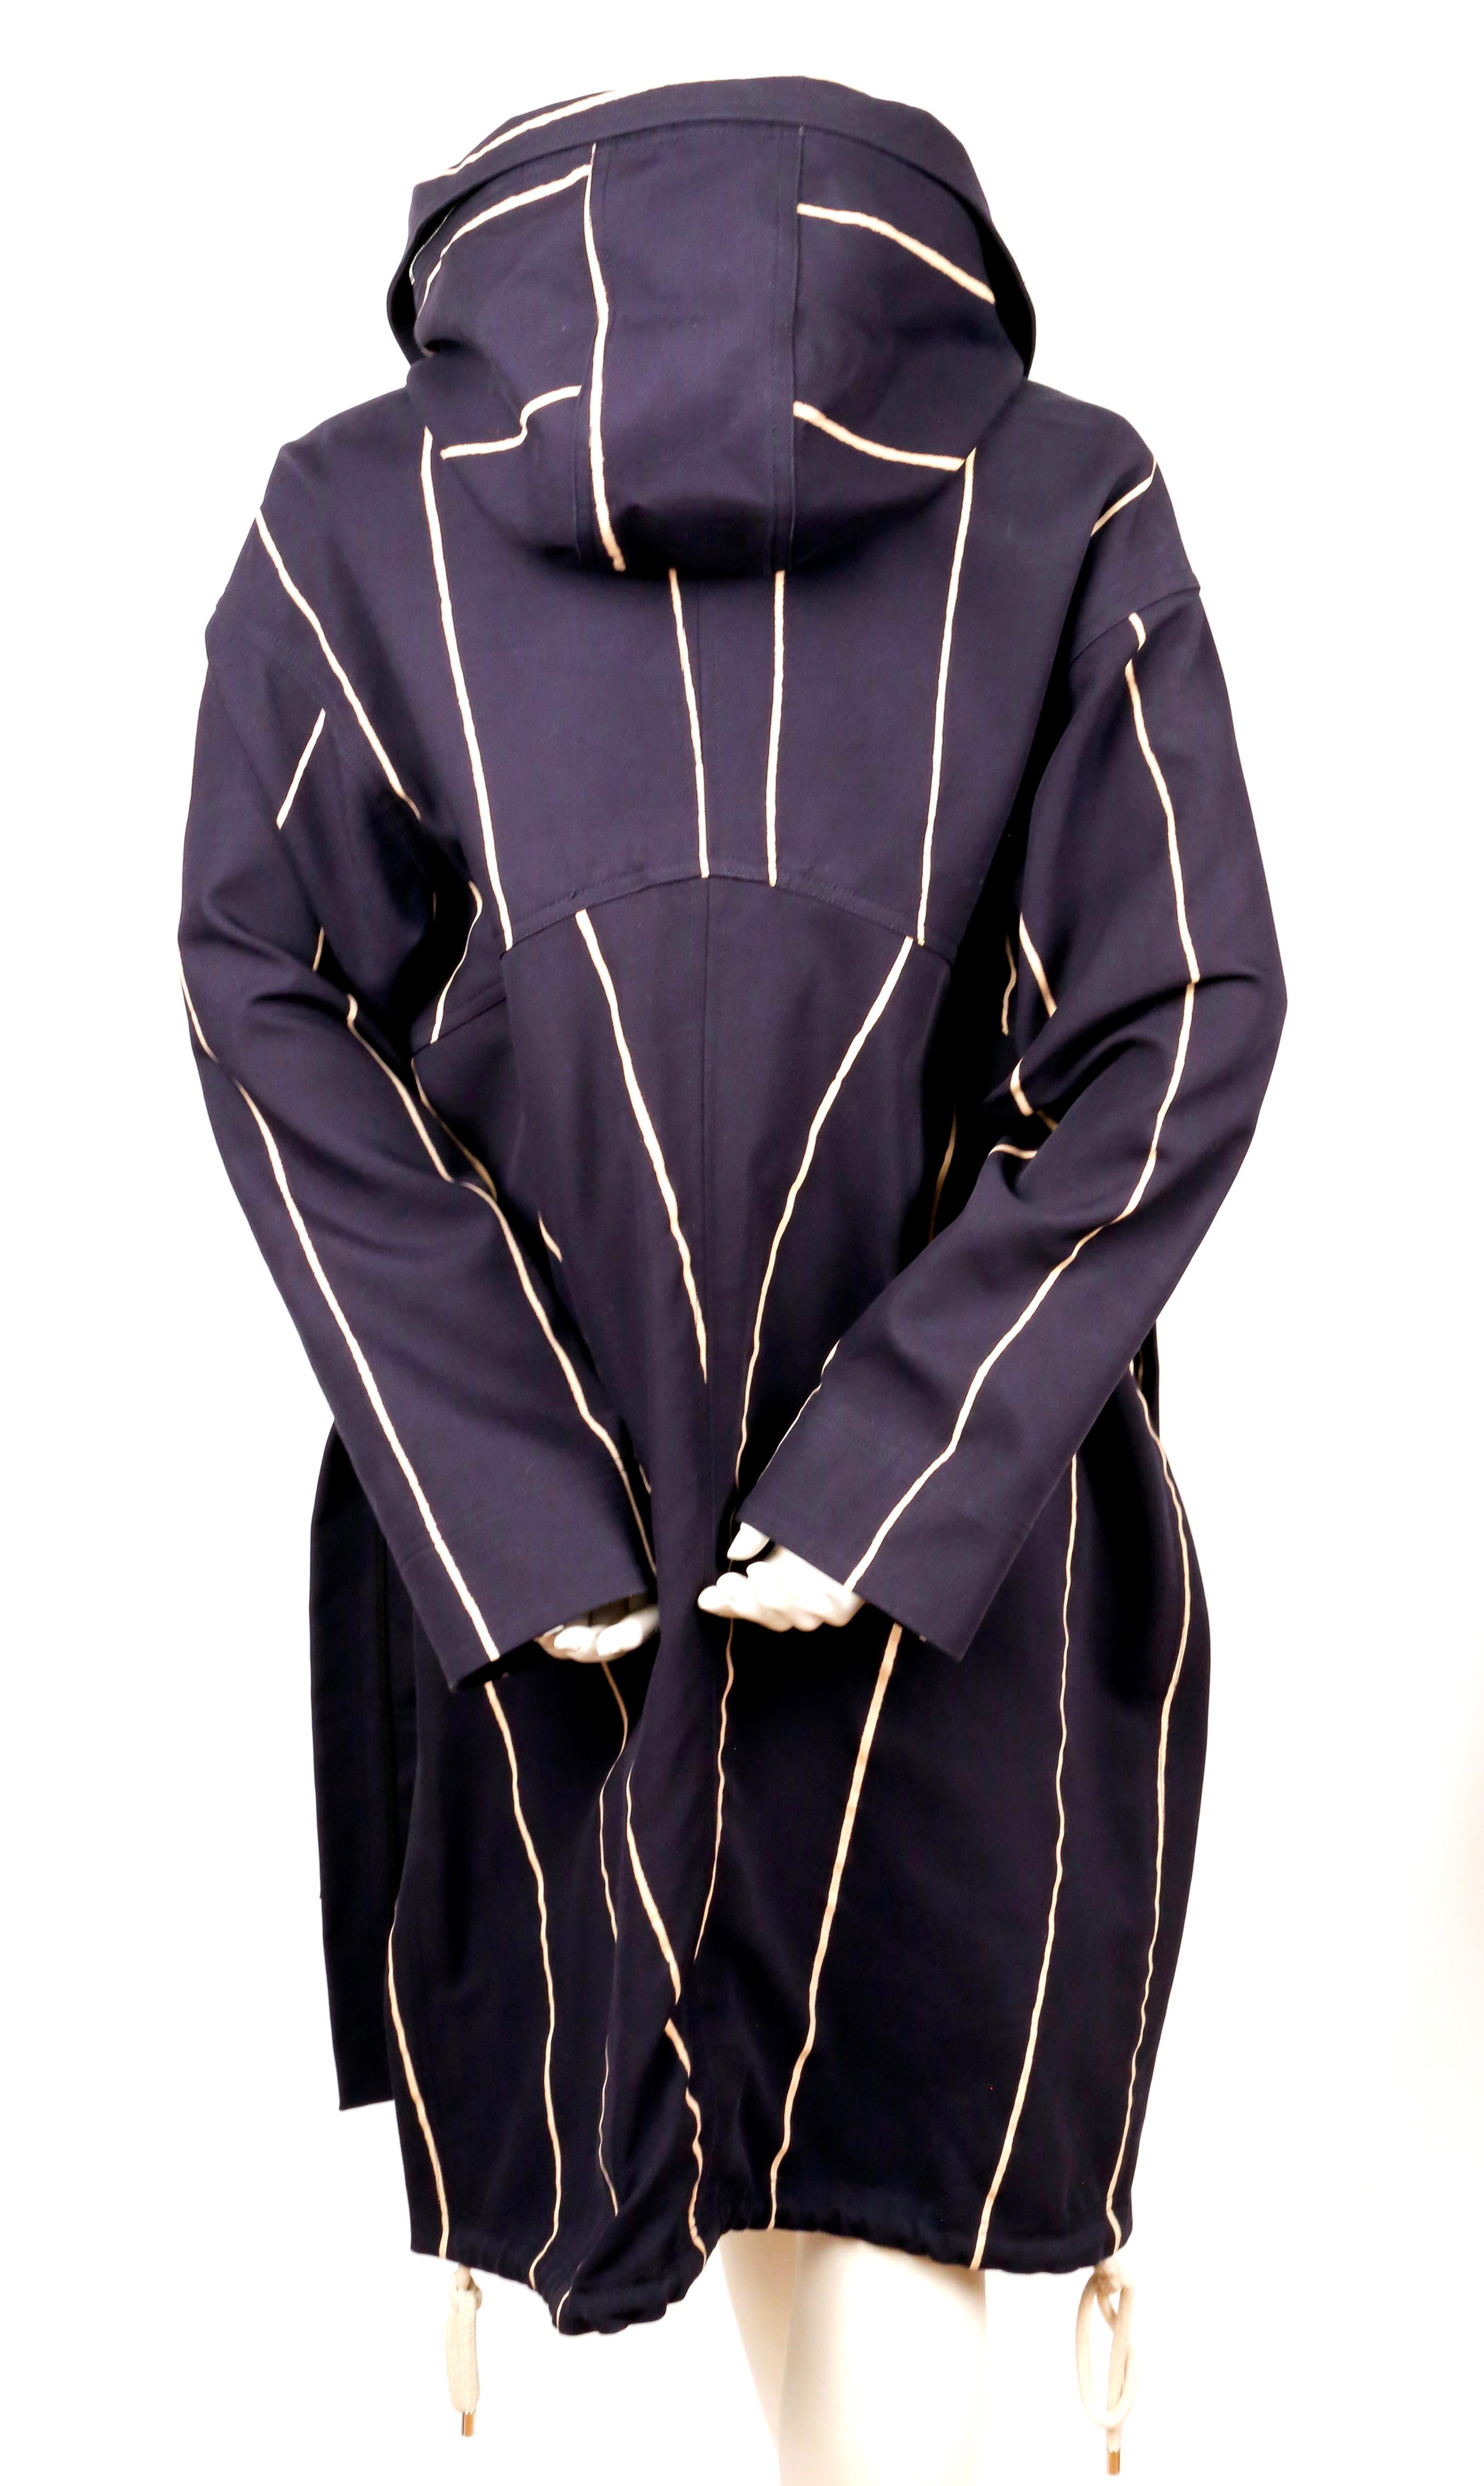 CELINE by PHOEBE PHILO navy draped coat with hood - resort 2016 For Sale 2